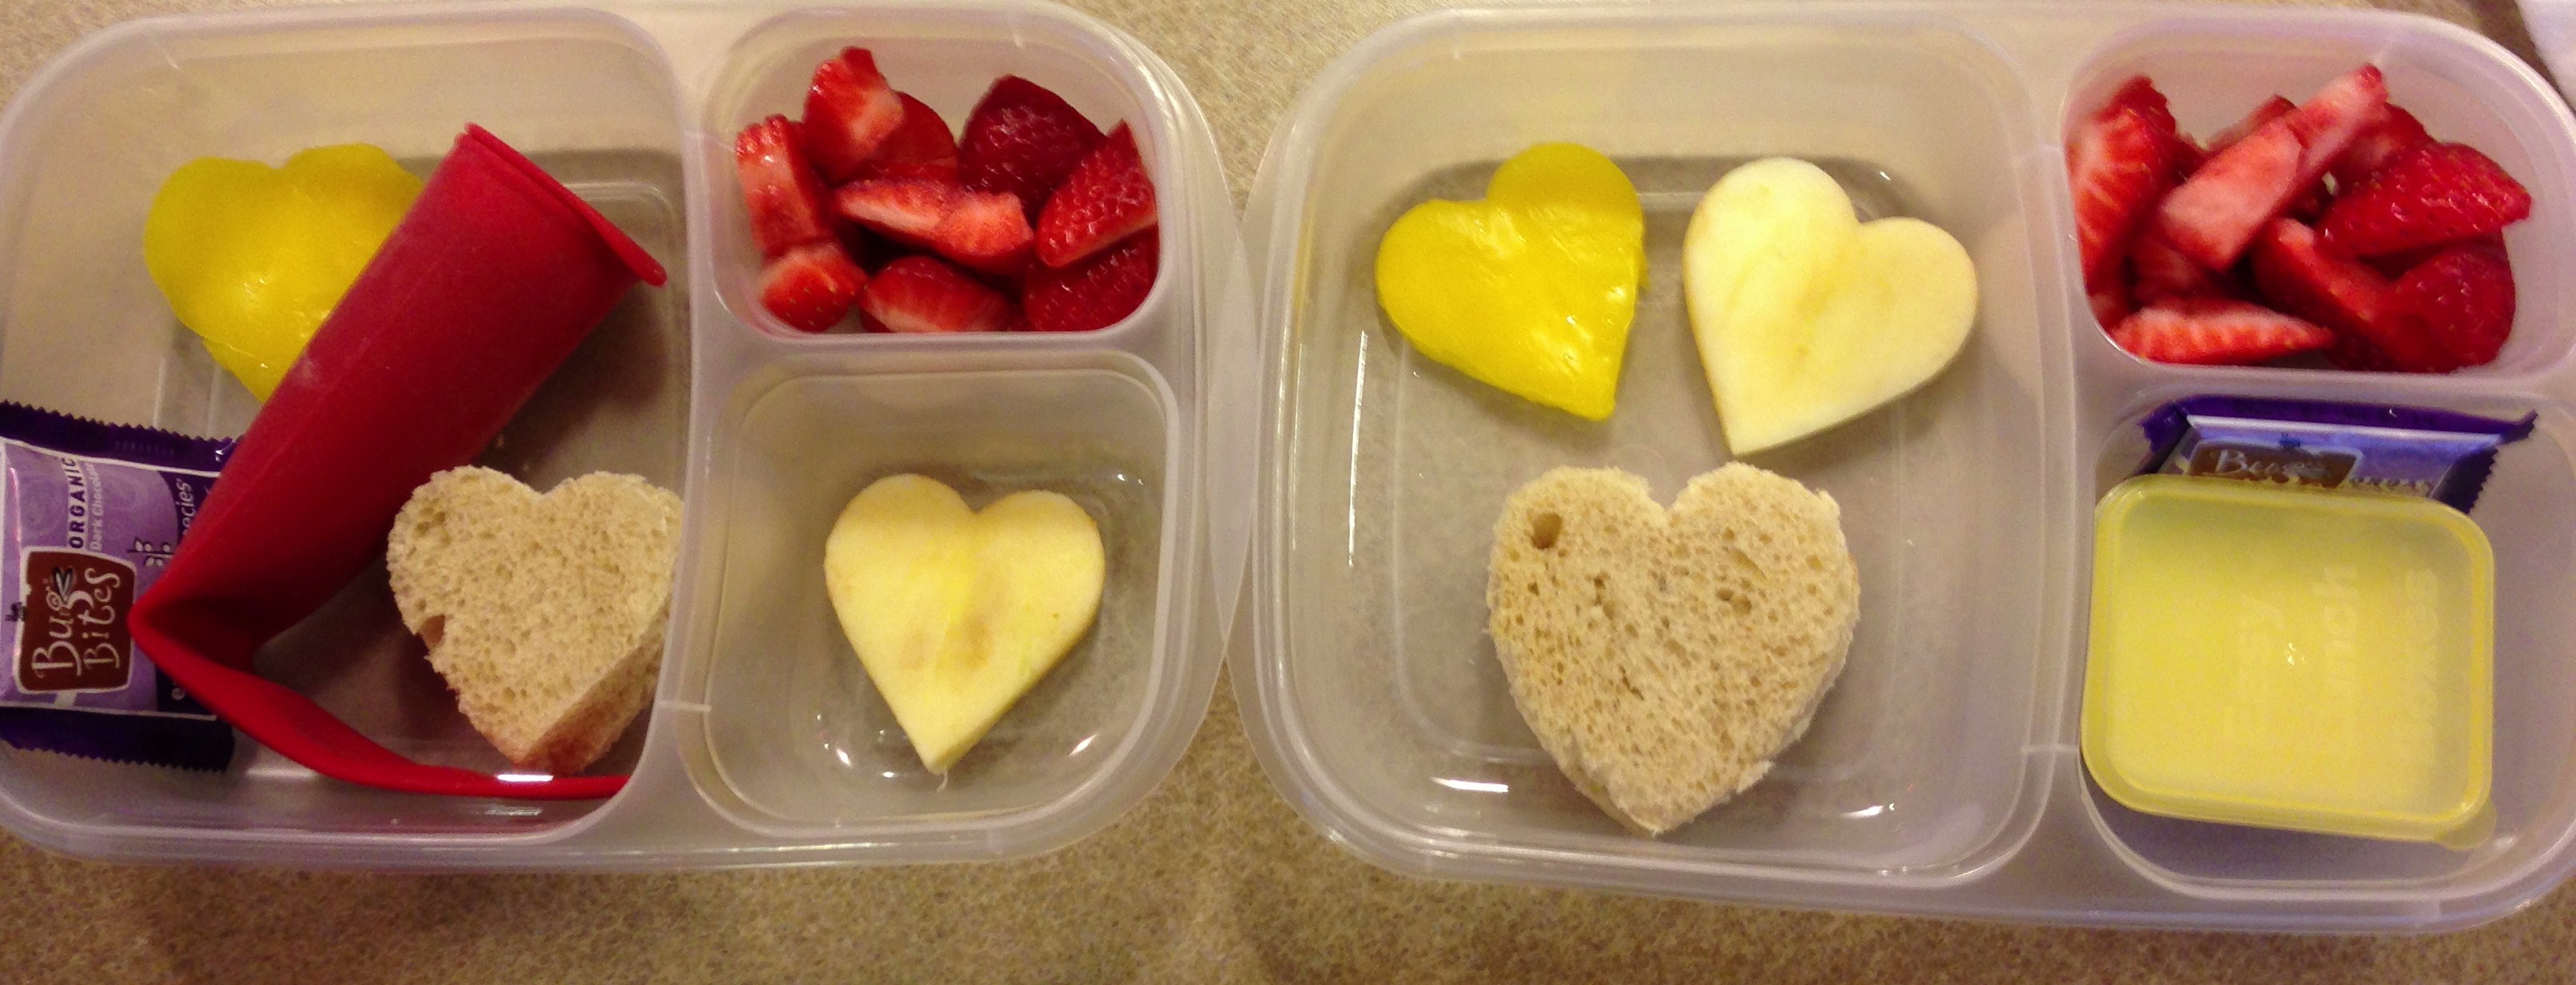 Heart shaped pb & j, heart shaped apple slices, and a heart shaped yellow pepper slice, strawberries. Yogurt smoothie in red squeeze tube and a piece of dark chocolate as a special treat! All ingredients organic.